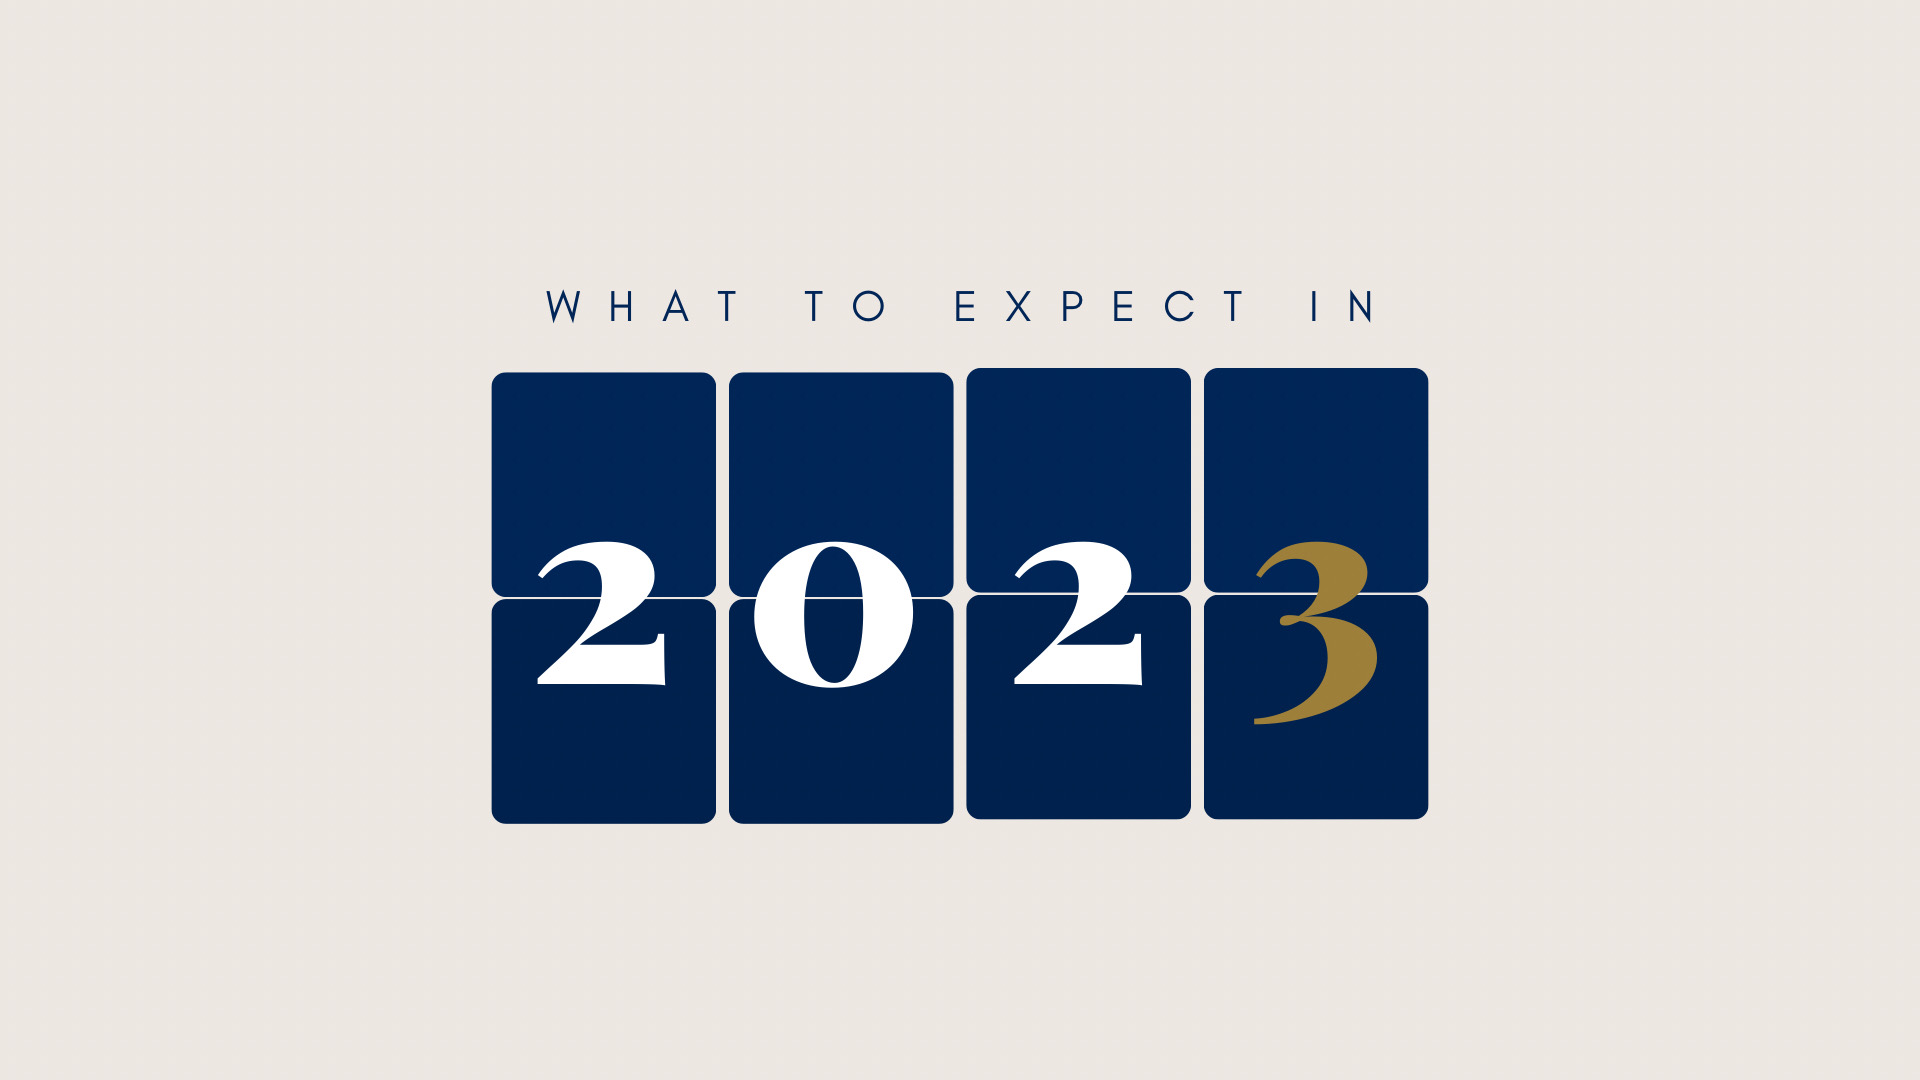 What to Expect in 2023